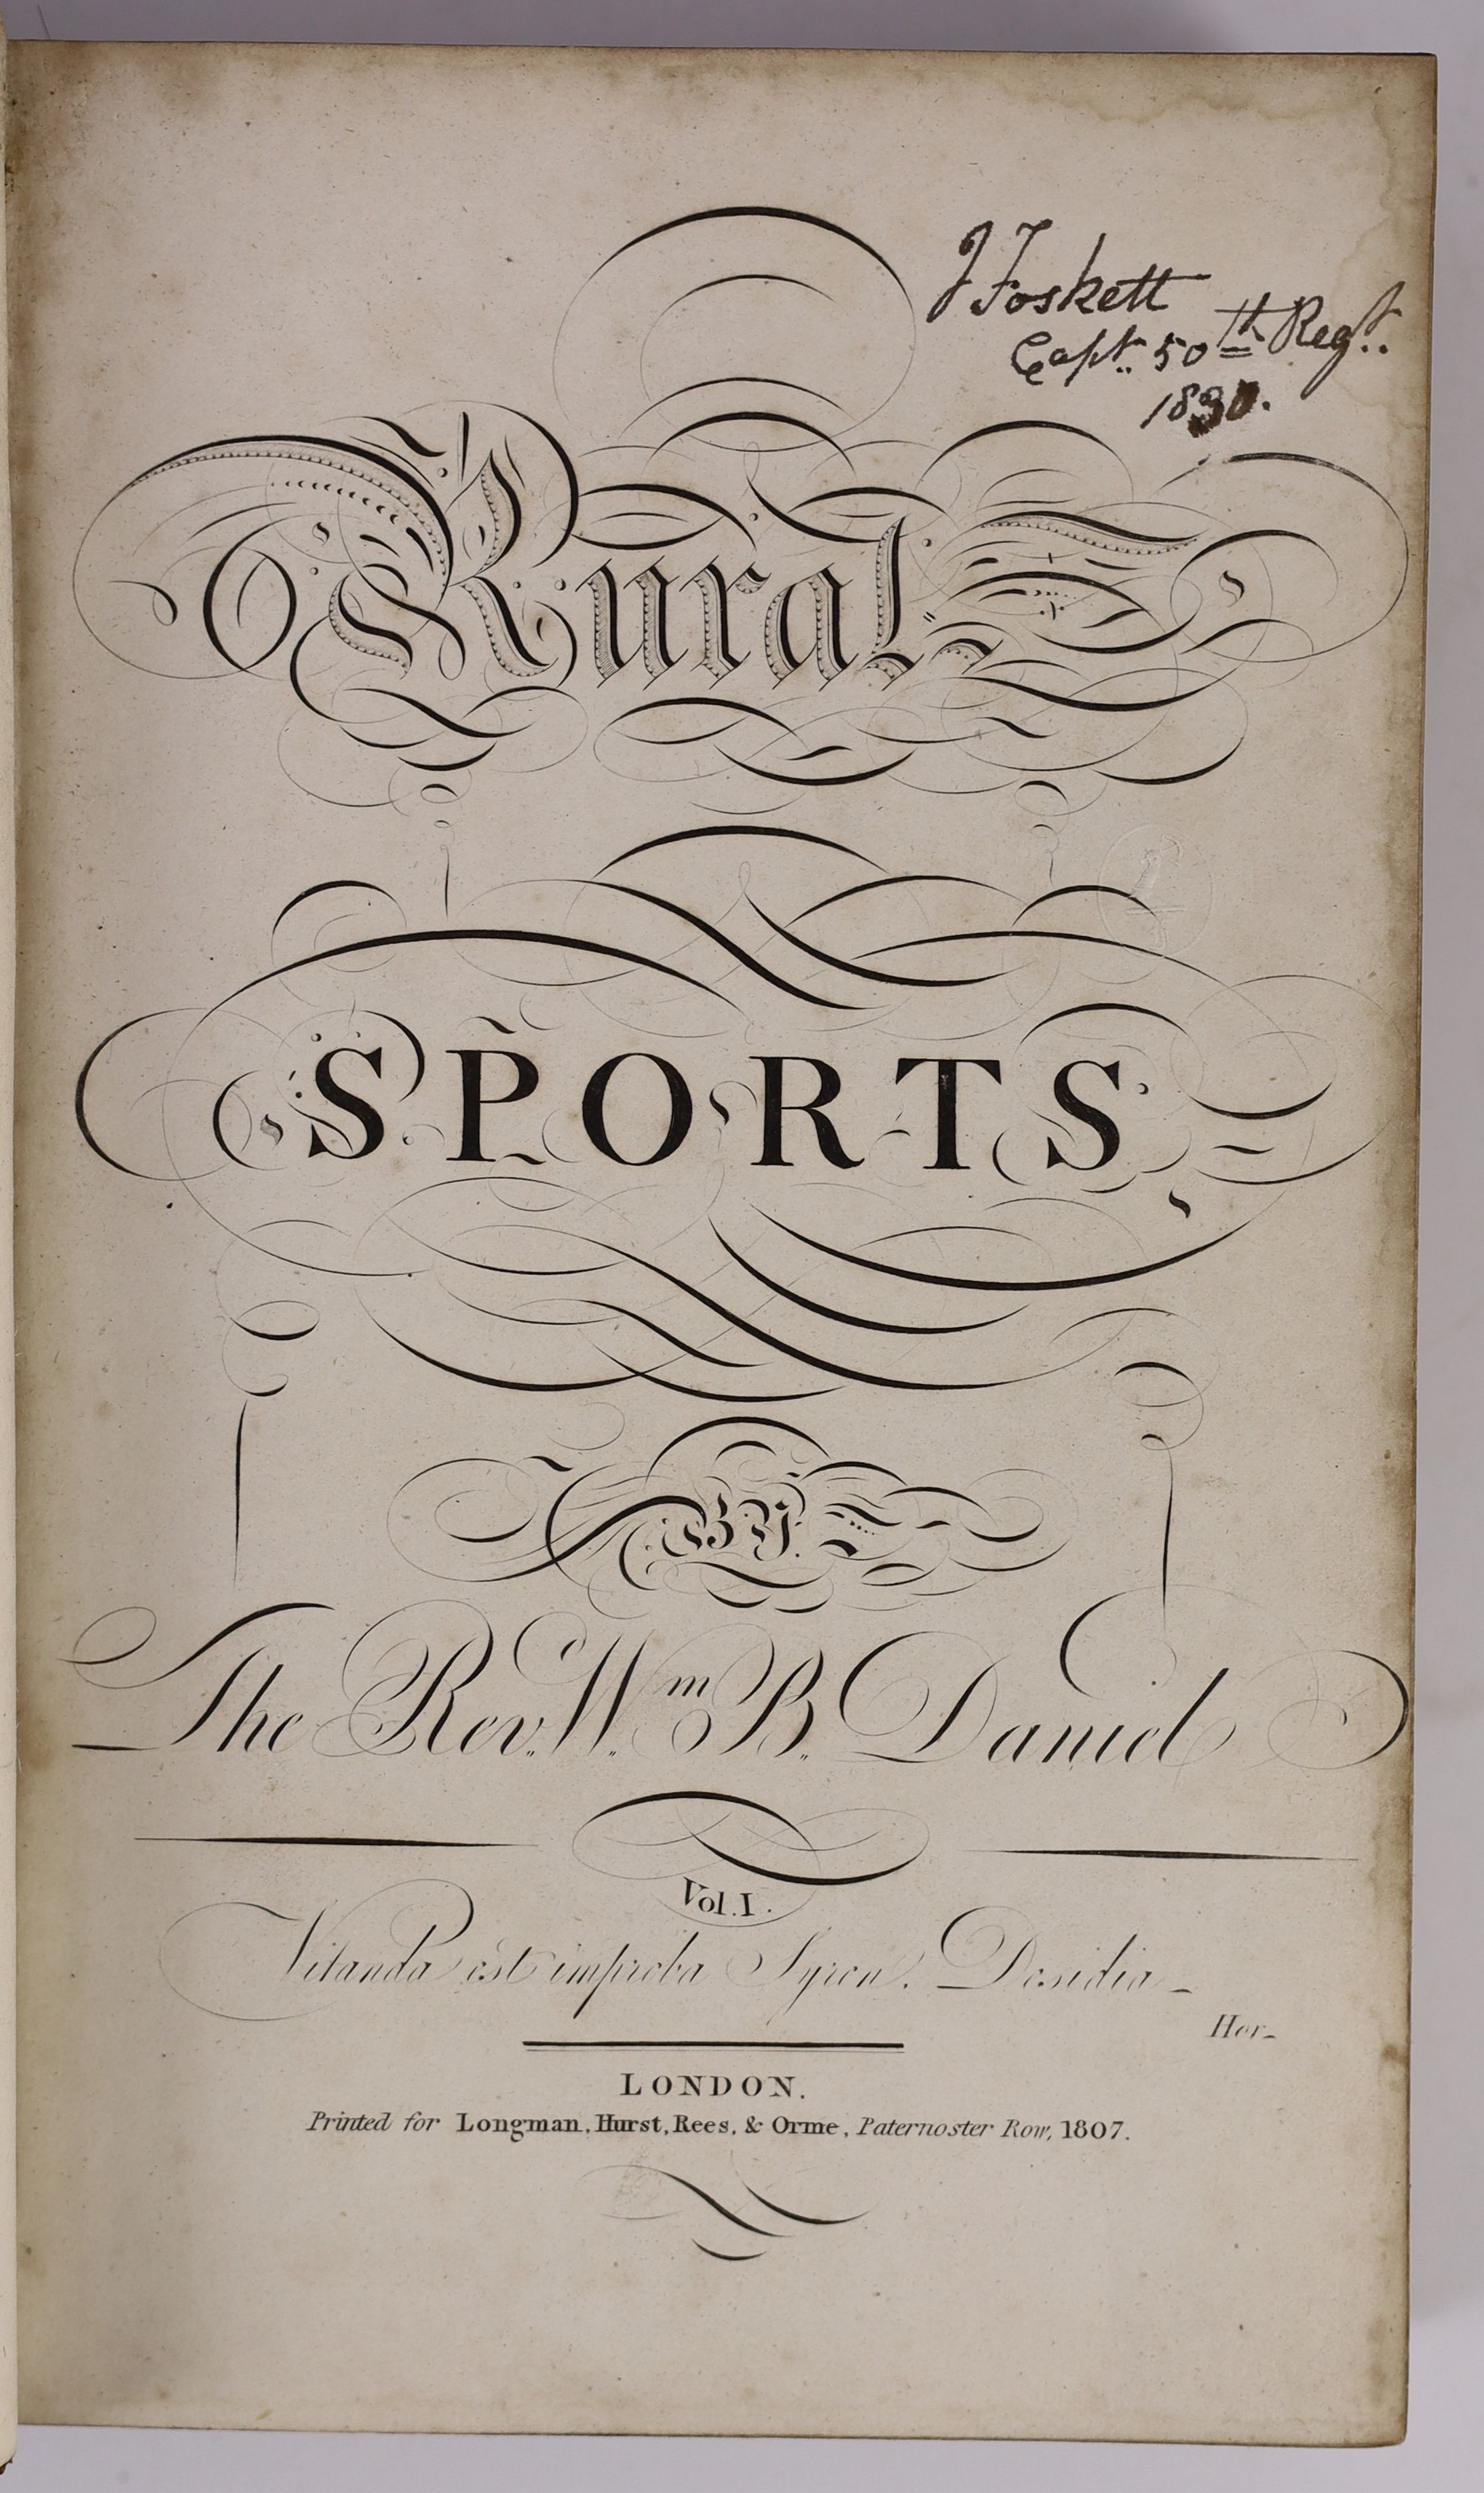 Daniel, William Barker - Rural Sports, 3 vols, 8vo, calf gilt line ruled, spotted throughout, London, 1807